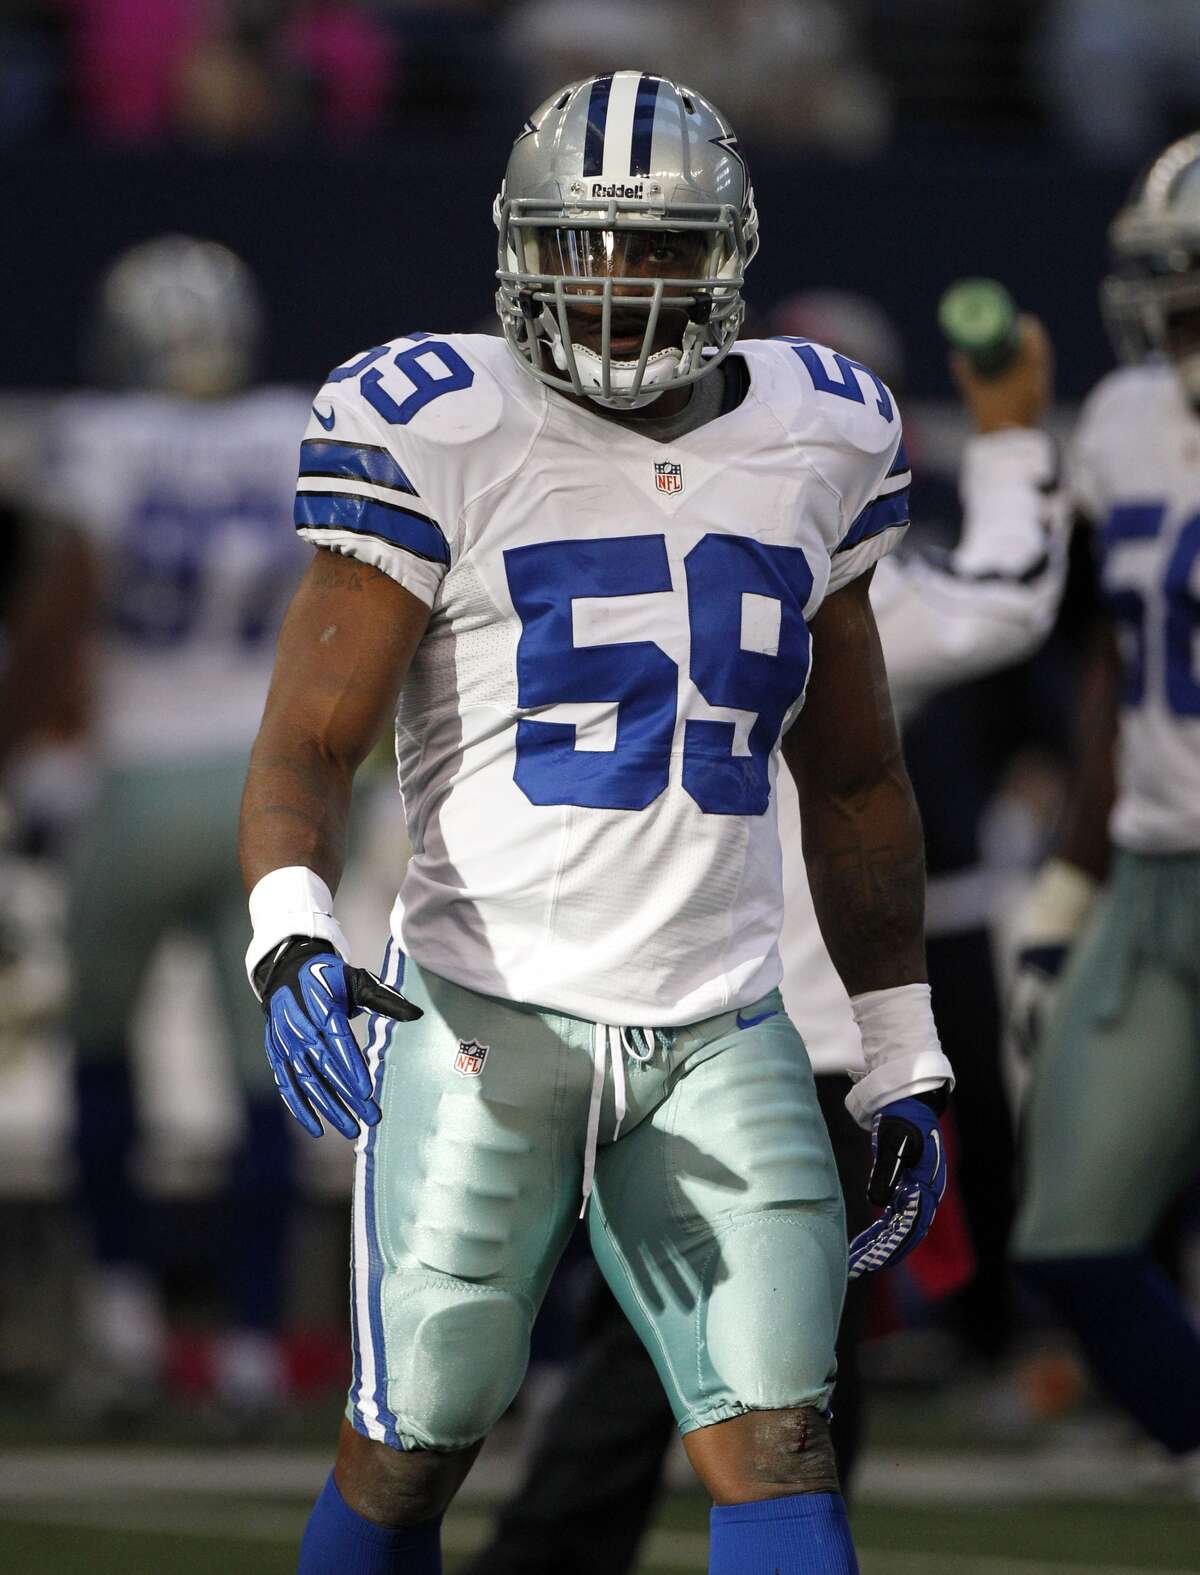 Cowboys linebacker Ernie Sims (59) on the field during the first half against the New York Giants Sunday, Oct. 28, 2012, in Arlington.  (AP Photo/Tony Gutierrez)